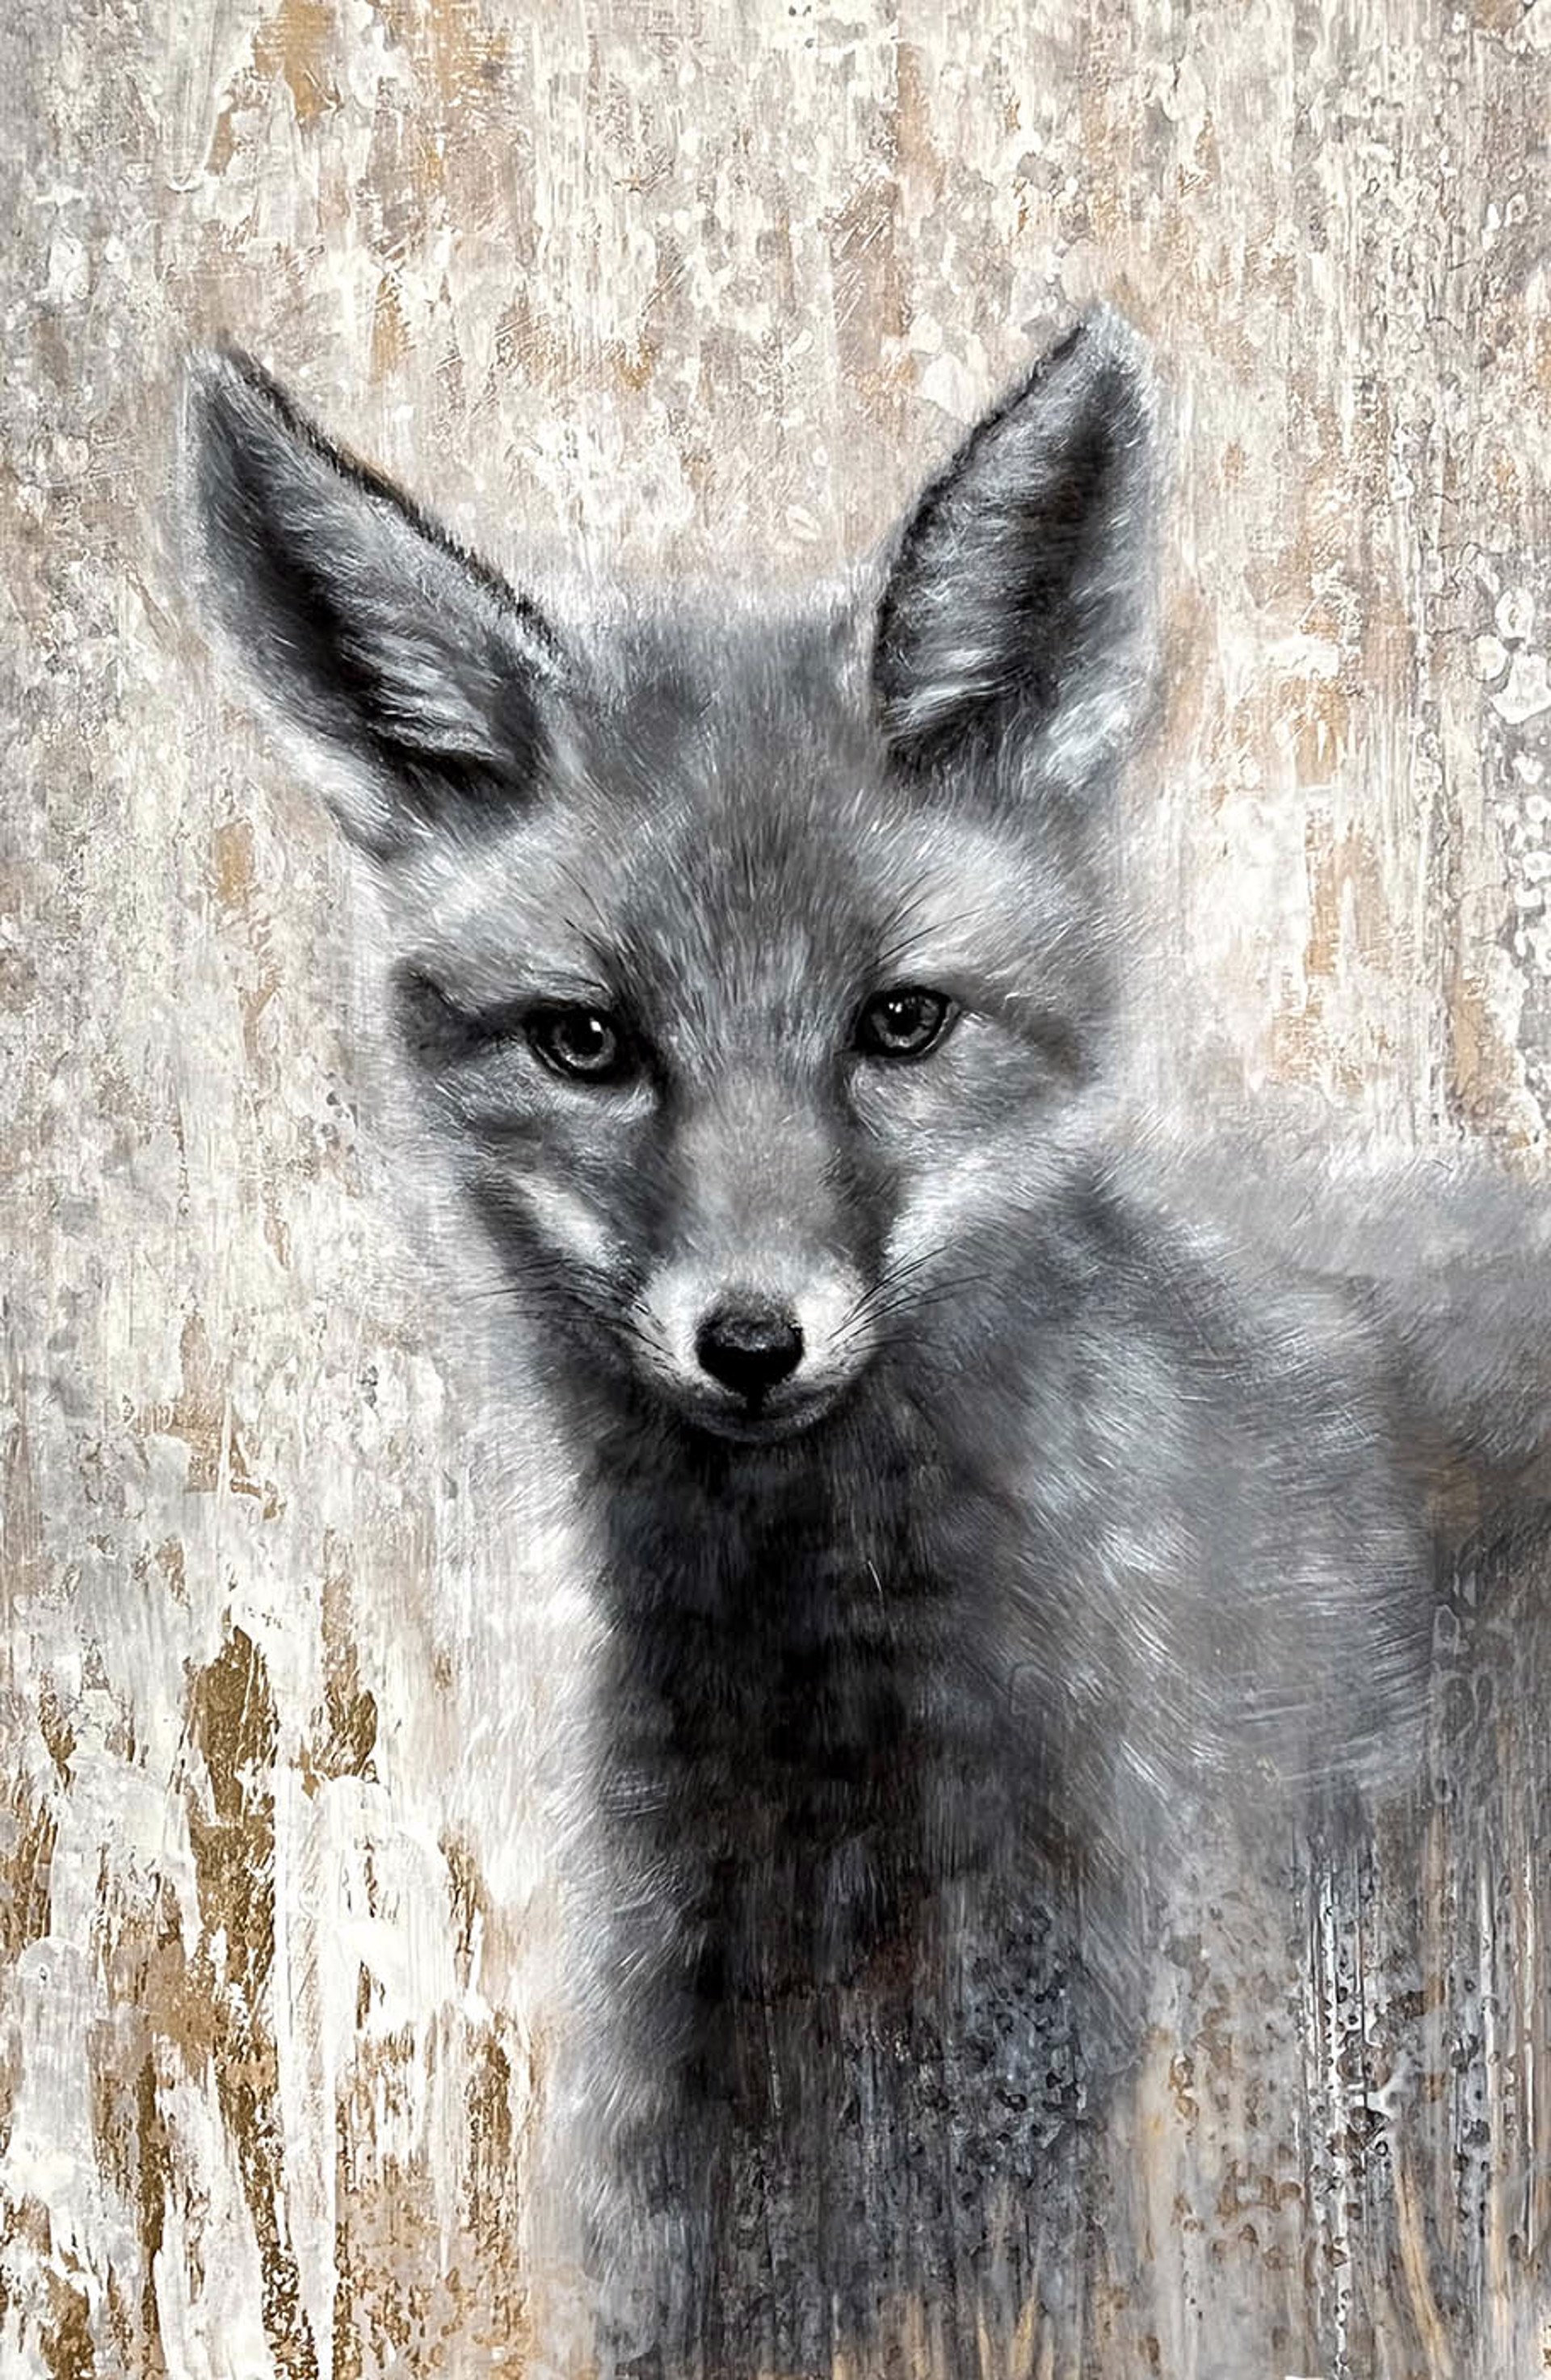 Original Acrylic Painting By Nealy Riley Featuring A Baby Fox In Black And White Over Abstract Gold Leaf Background